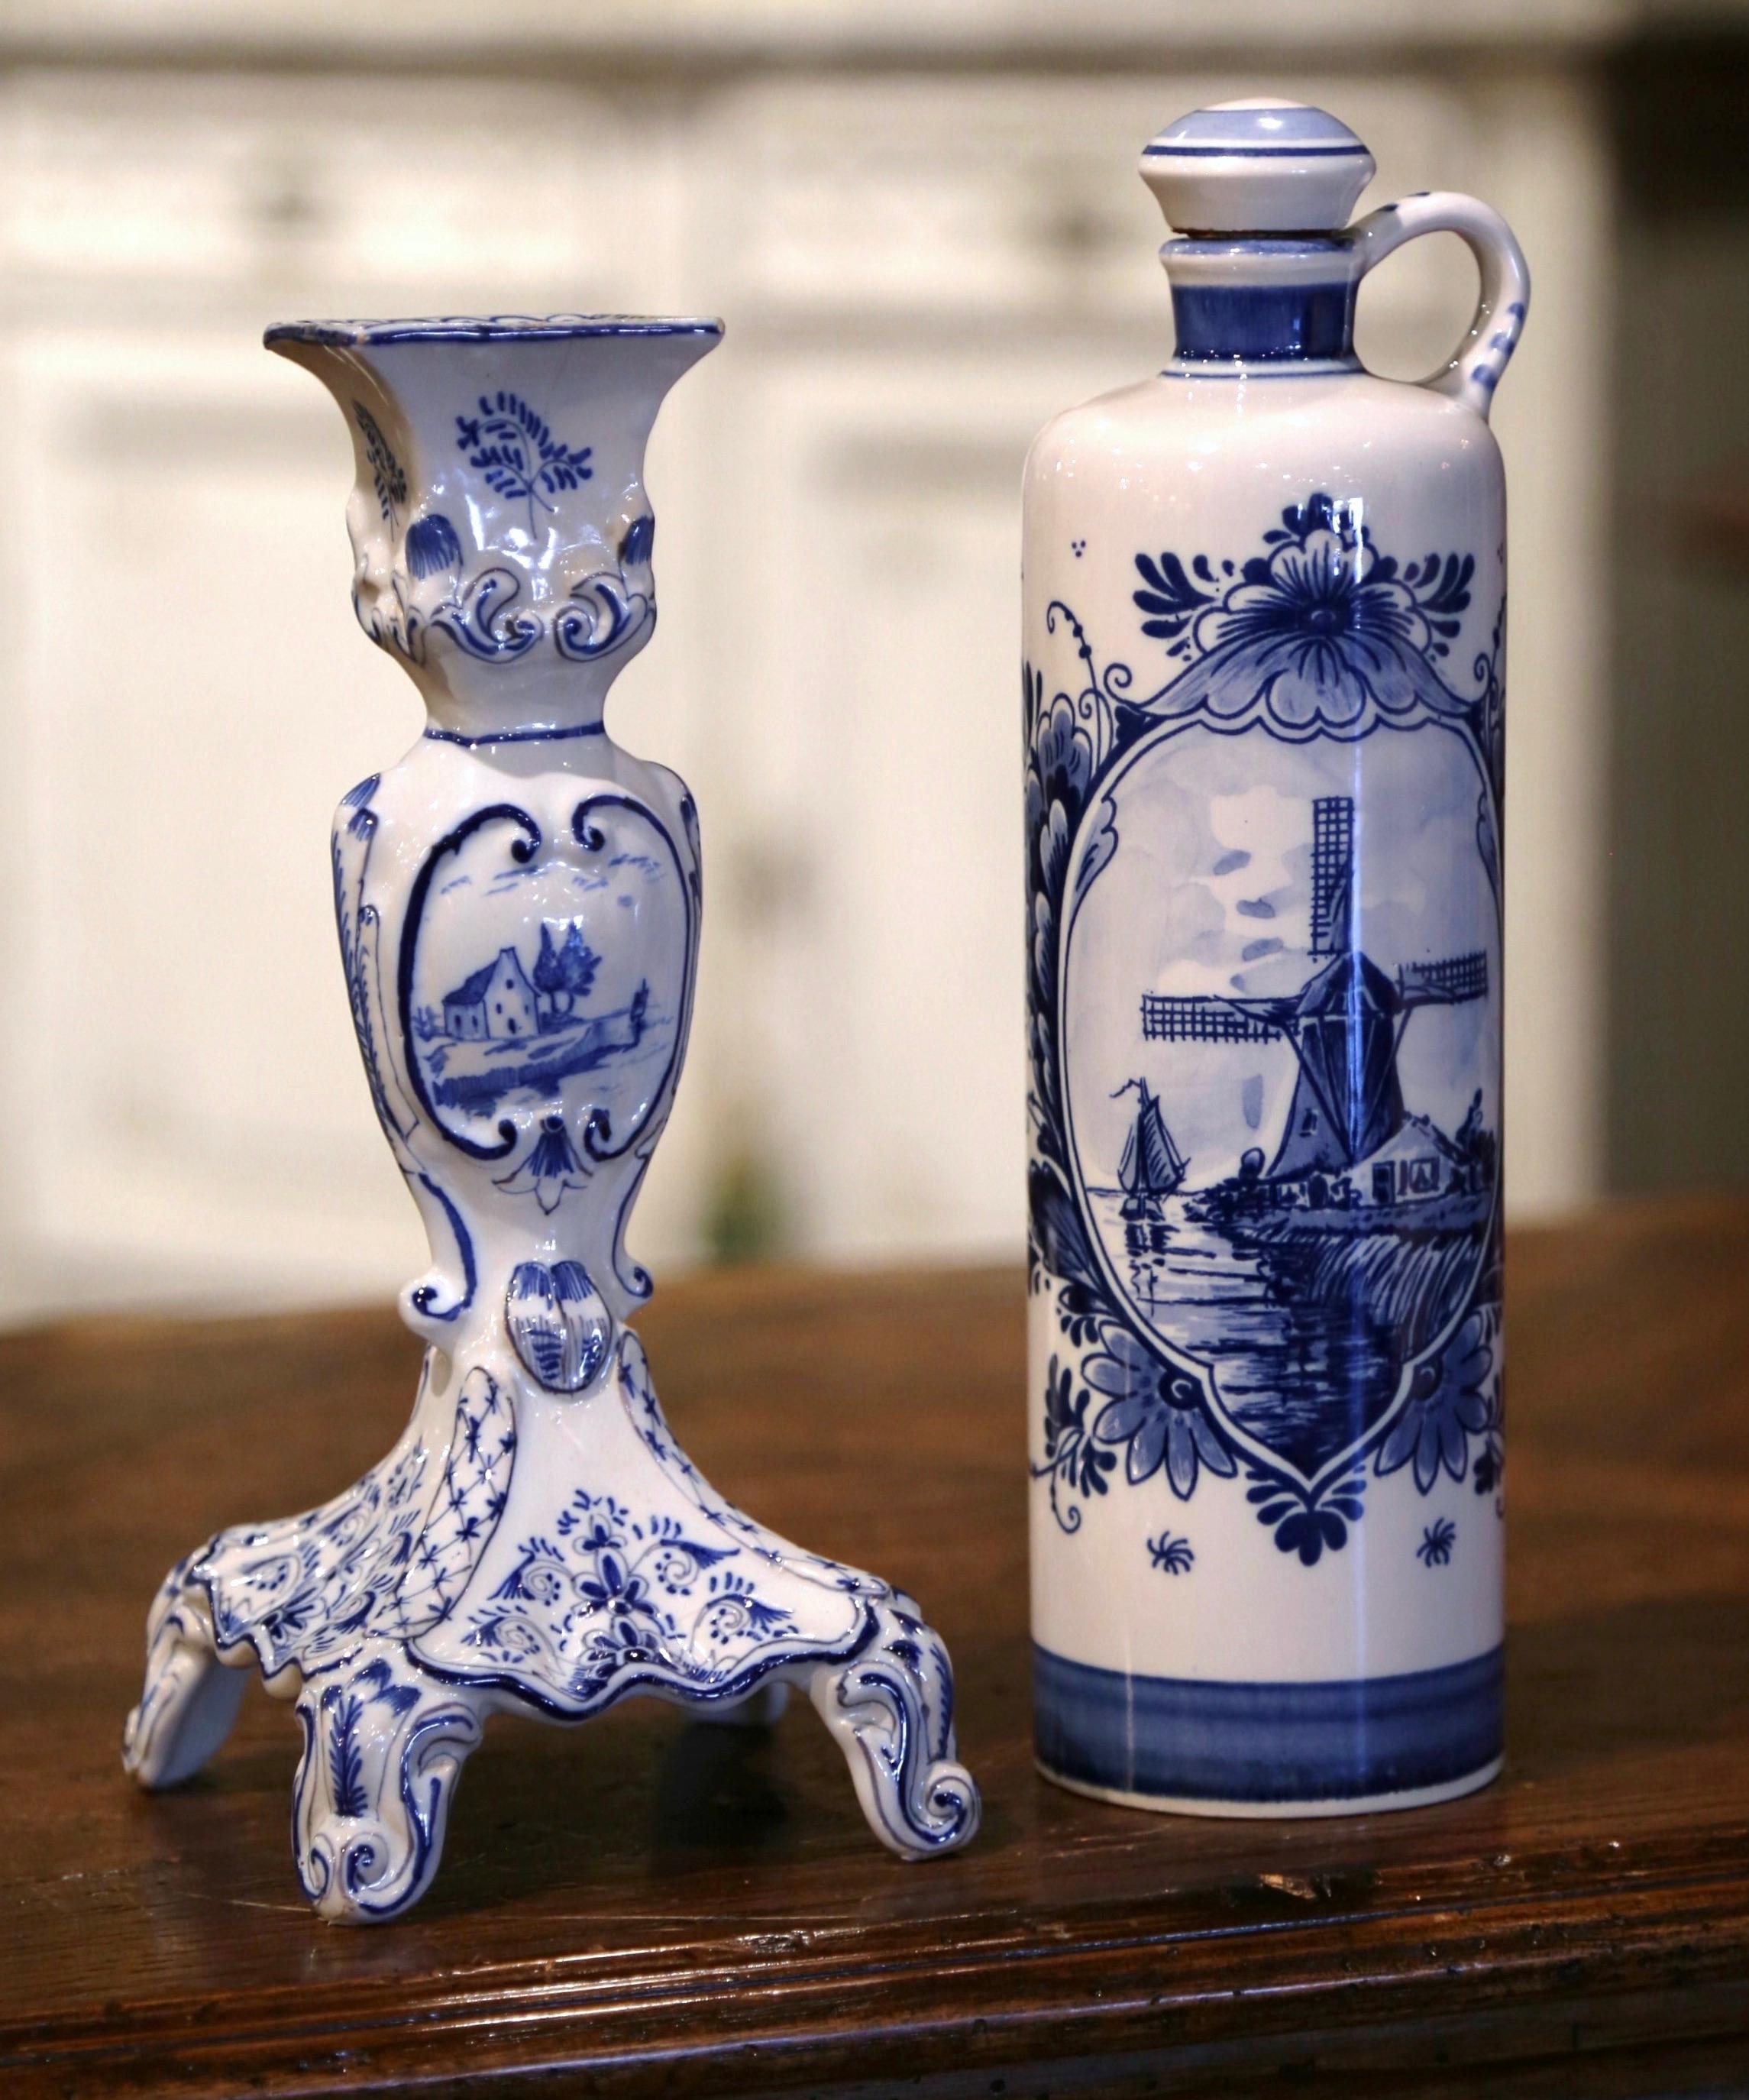 Decorate a shelf or kitchen counter with these elegant antique Delft pieces. Crafted in Holland circa 1940, the set includes a tall olive oil bottle with cork top, and a candle holder. Both items are decorated with hand painted windmill and sailboat